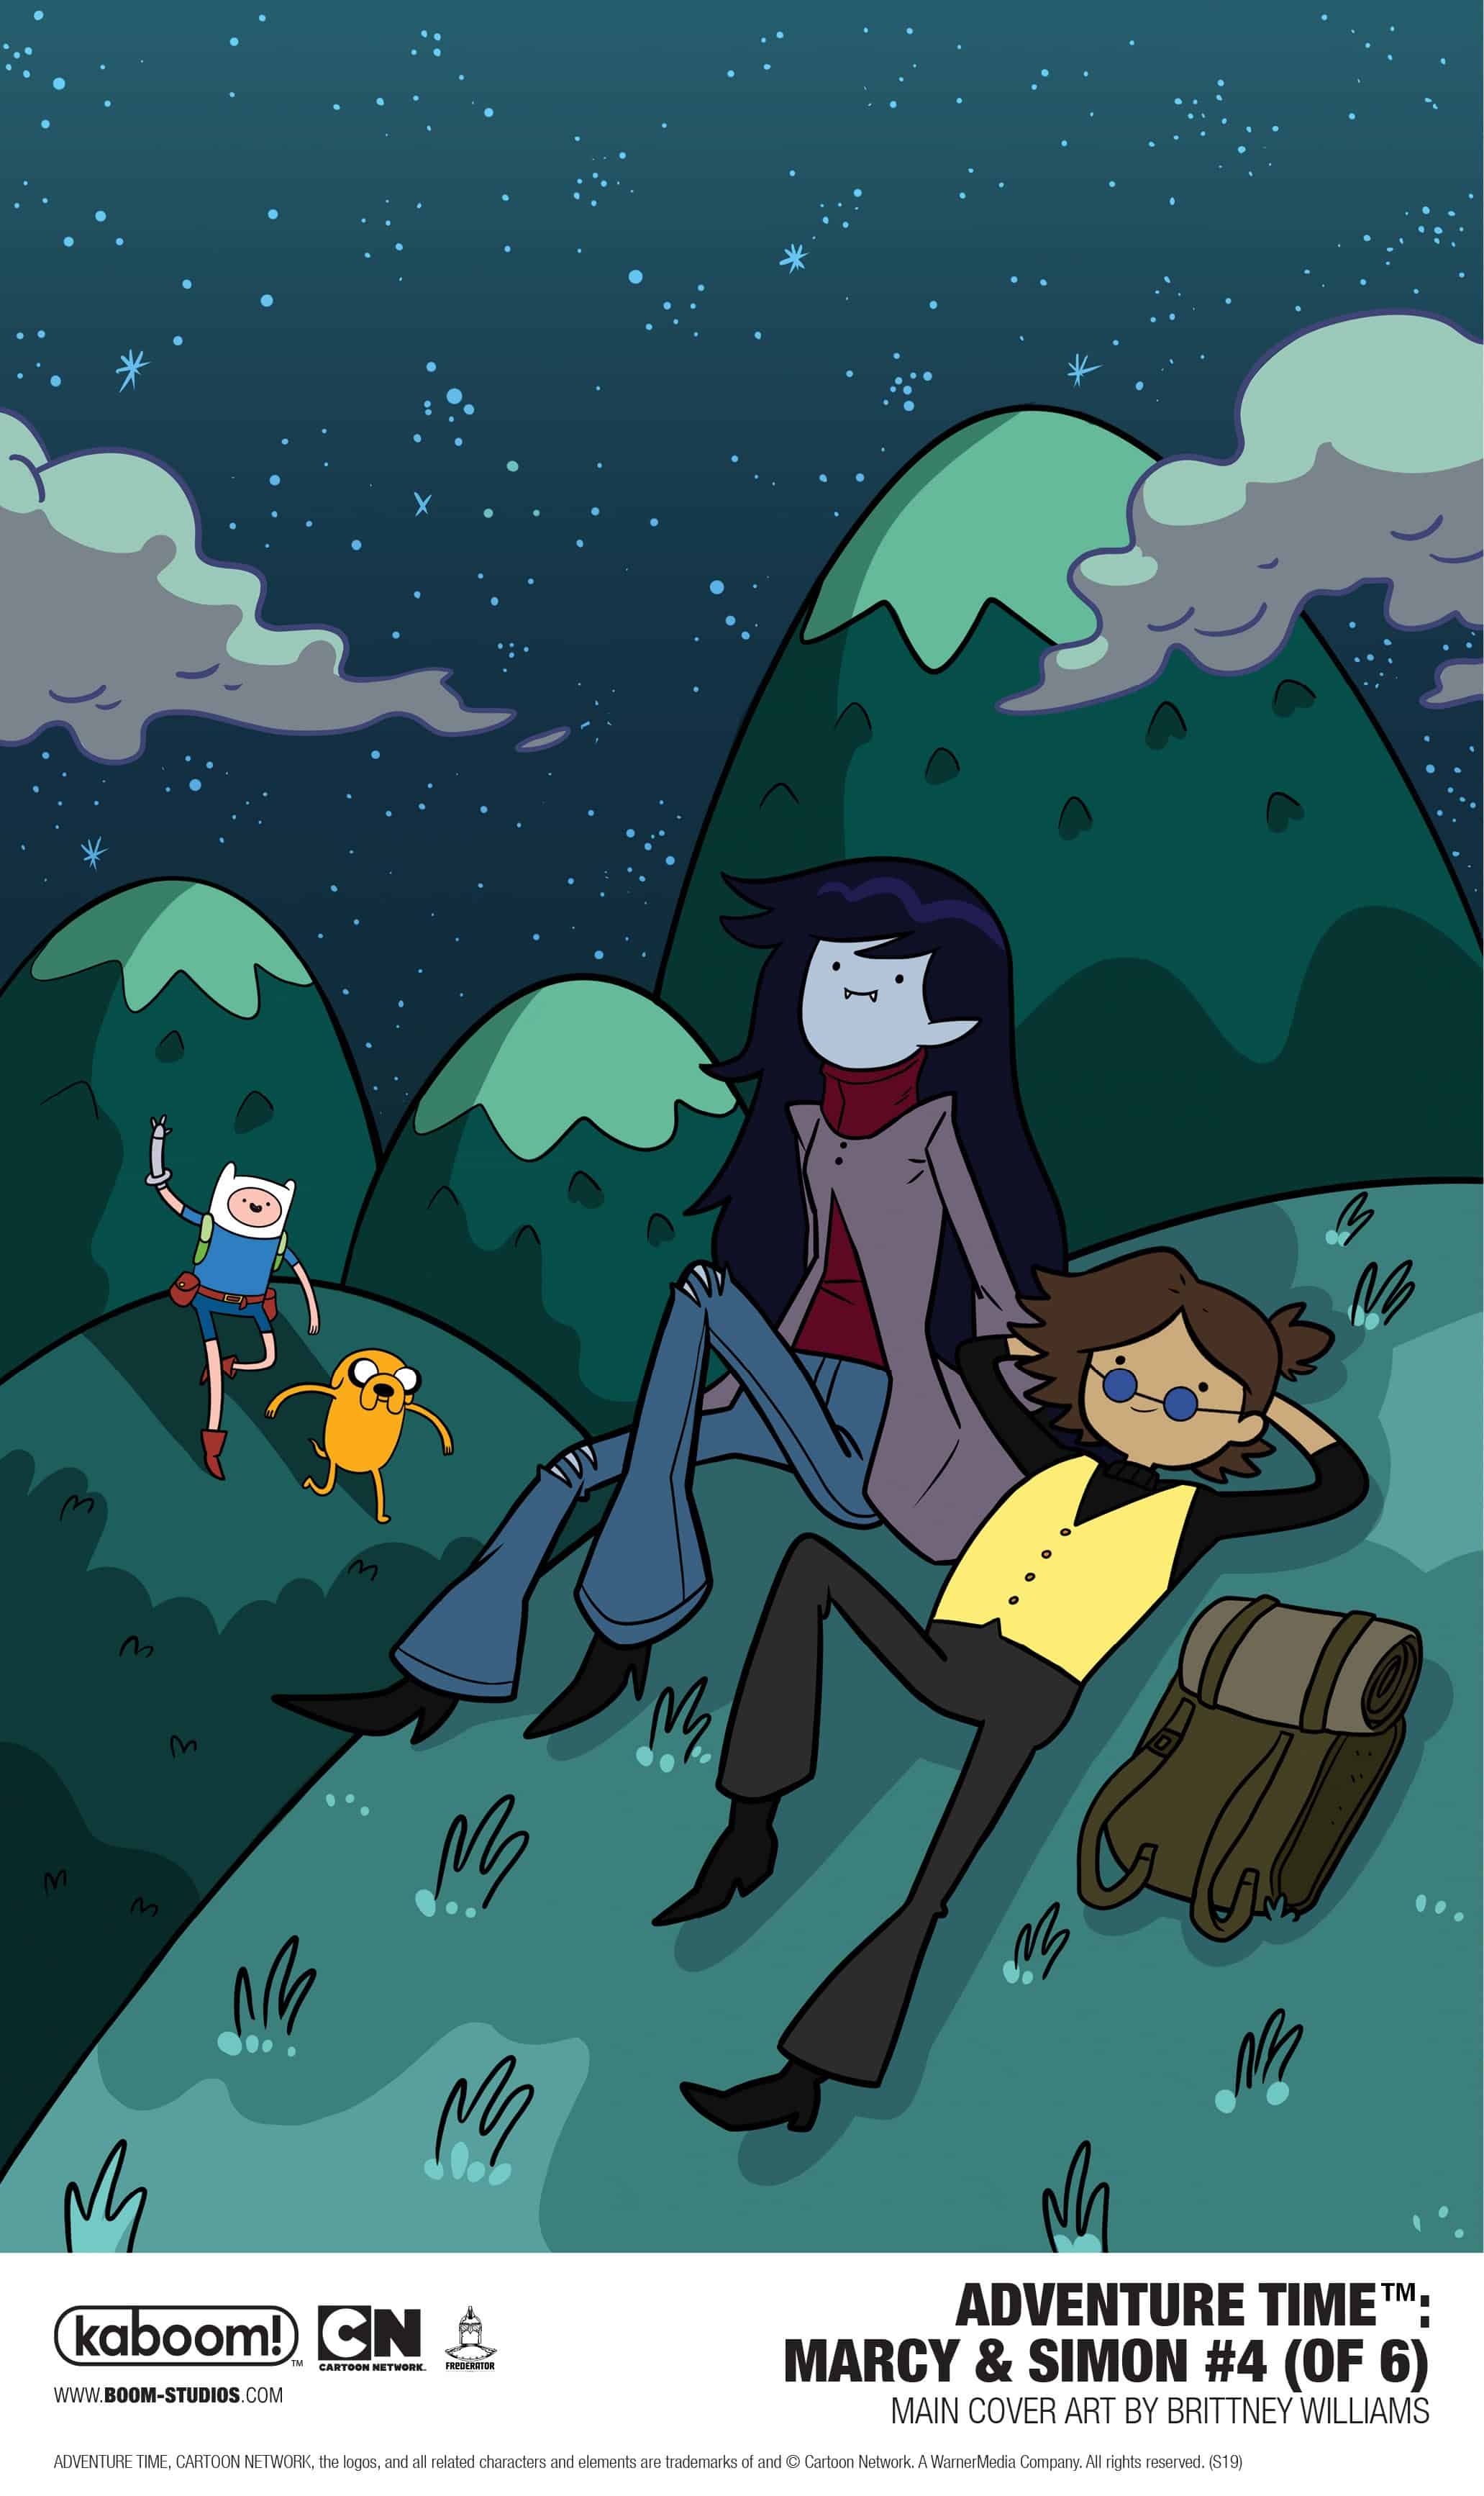 Adventure time marcy and simon